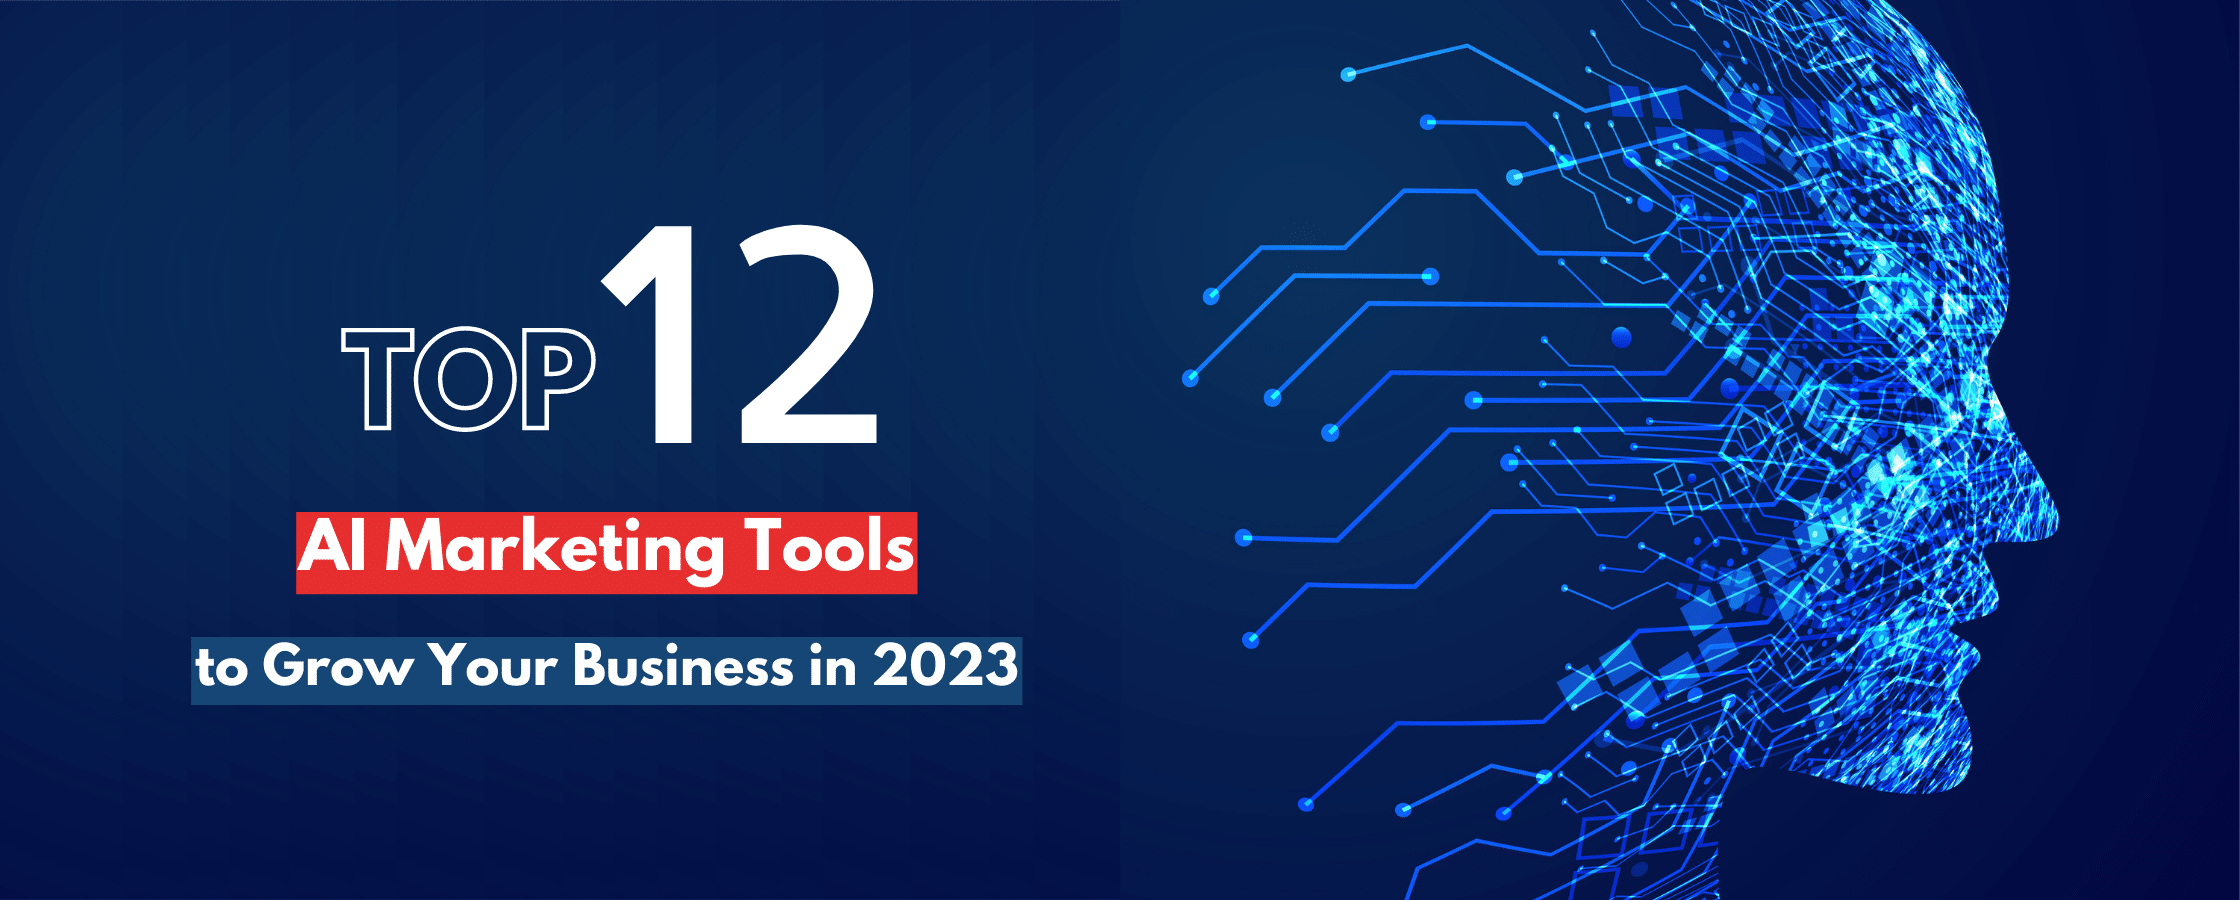 Top 12 AI Marketing Tools to Grow Your Business in 2023